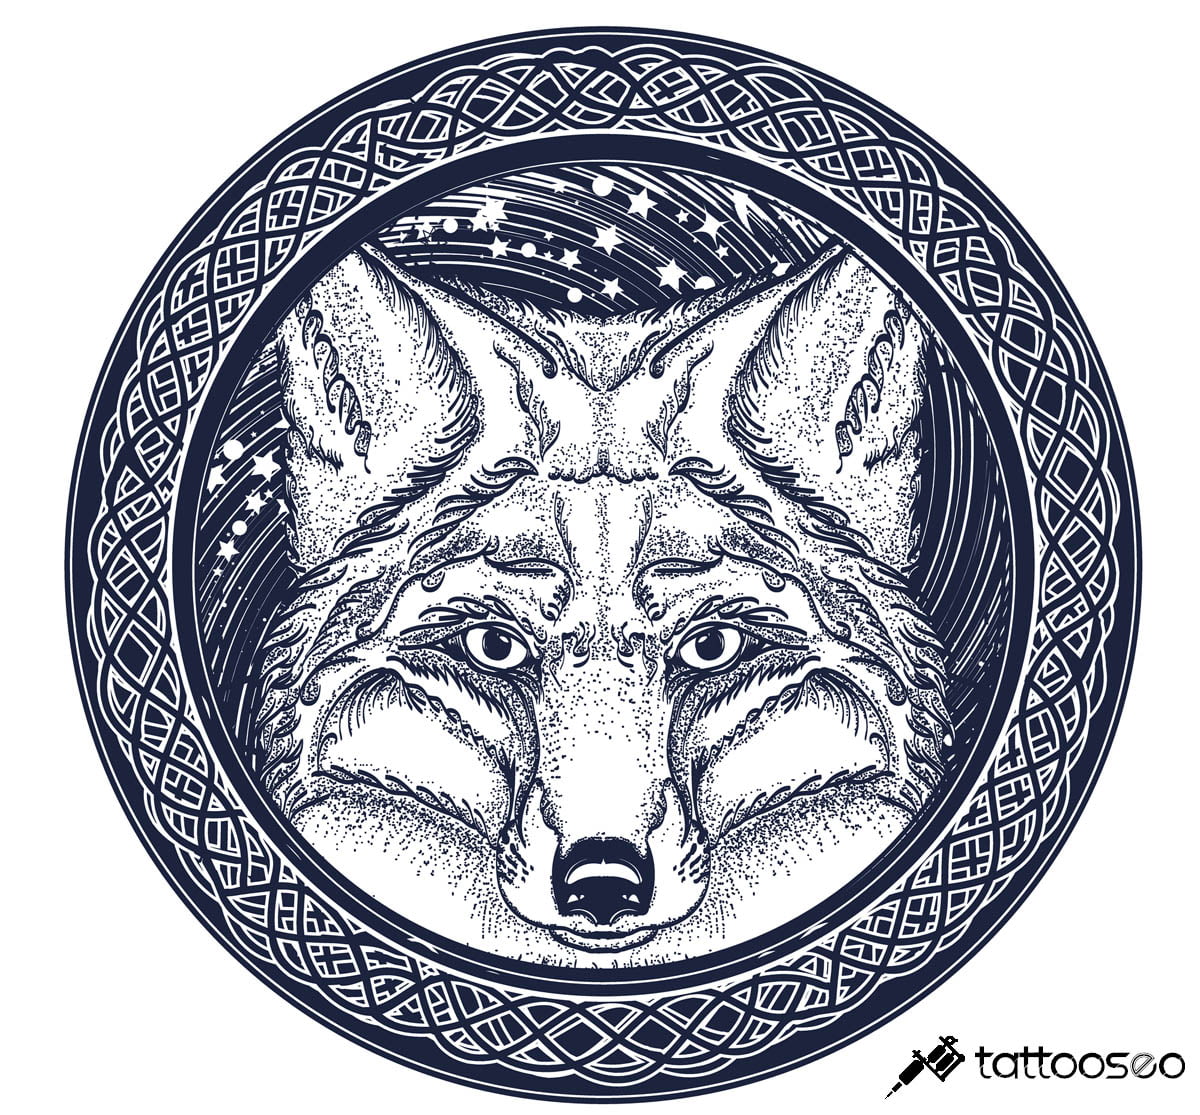 Coyote tattoo meanings